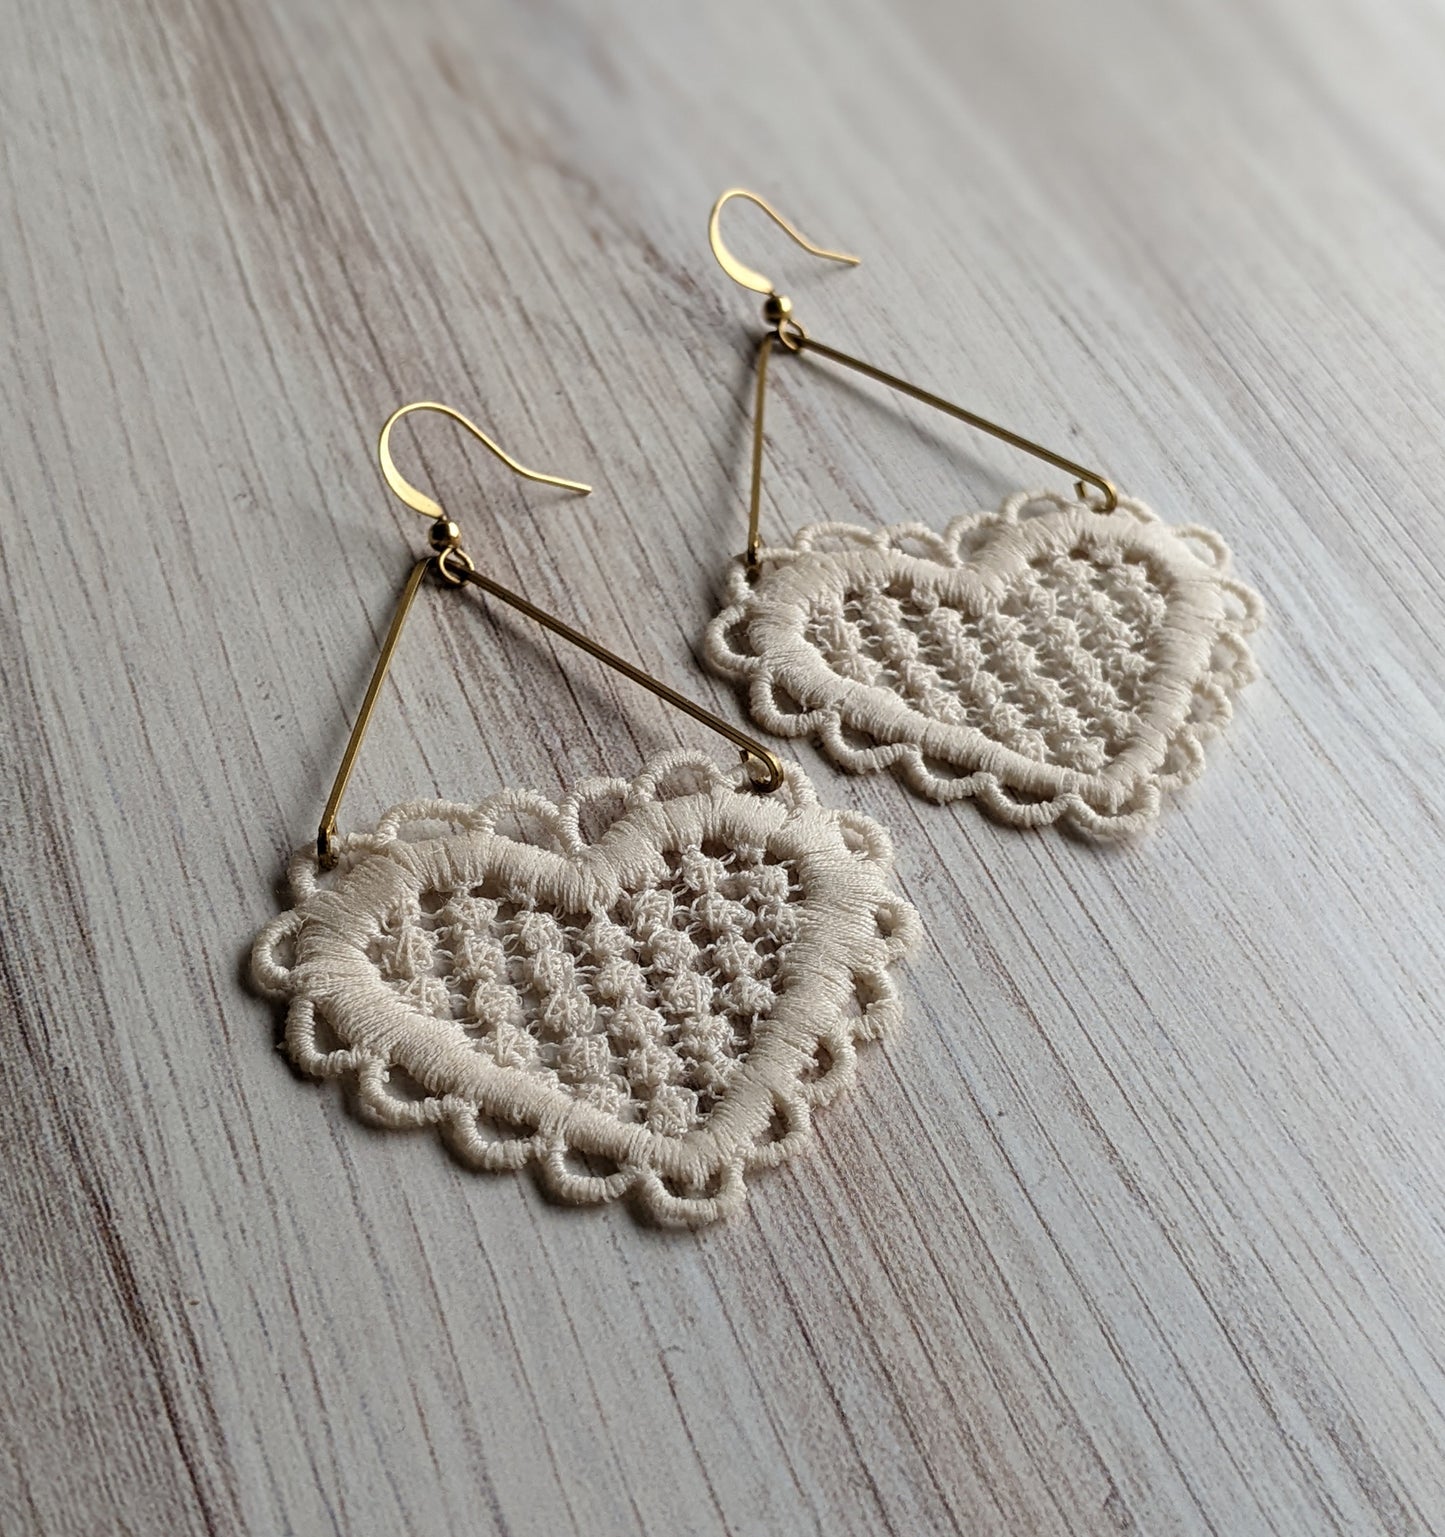 Lace Heart Earrings, Long And Lightweight Dangles, Cotton Fabric And Brass